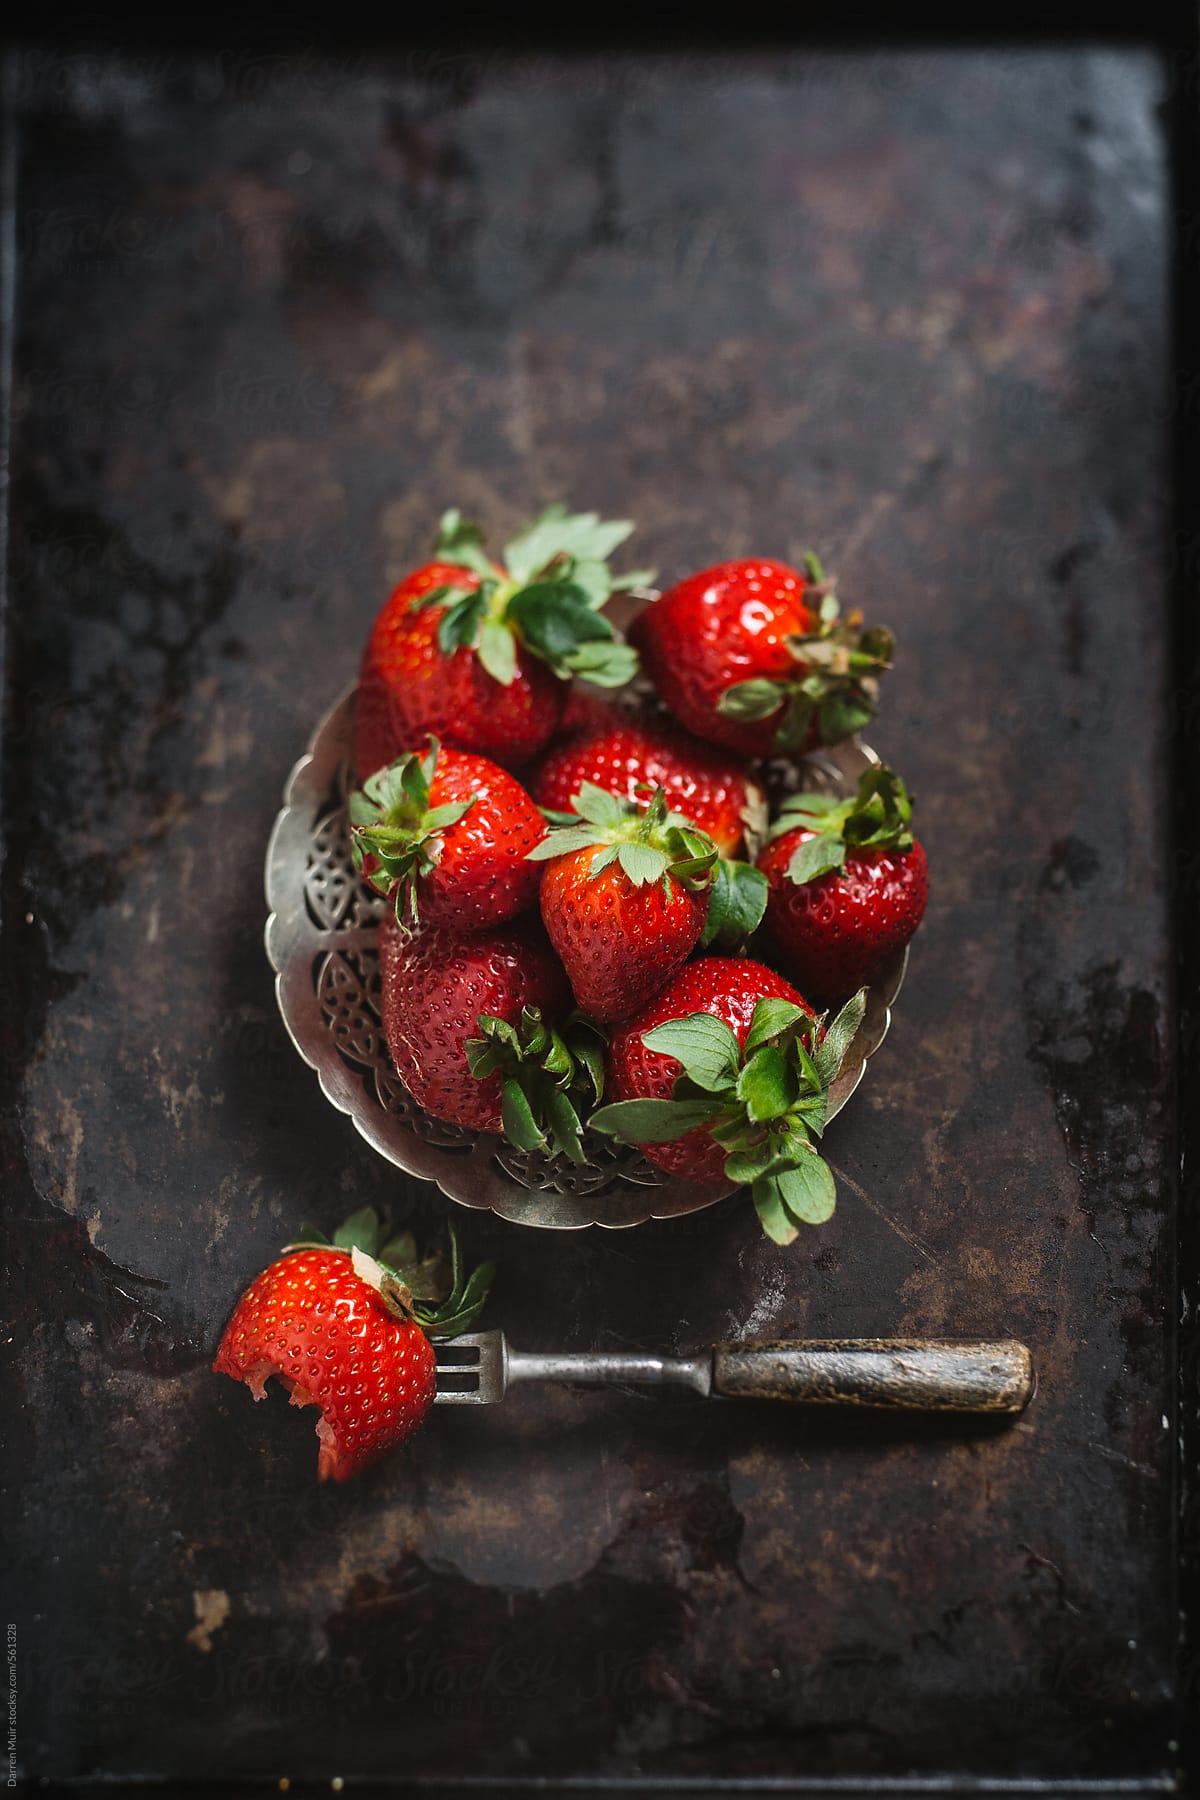 Fresh strawberry\'s on metal background with fork, one with a bite out of it. Seen from above.